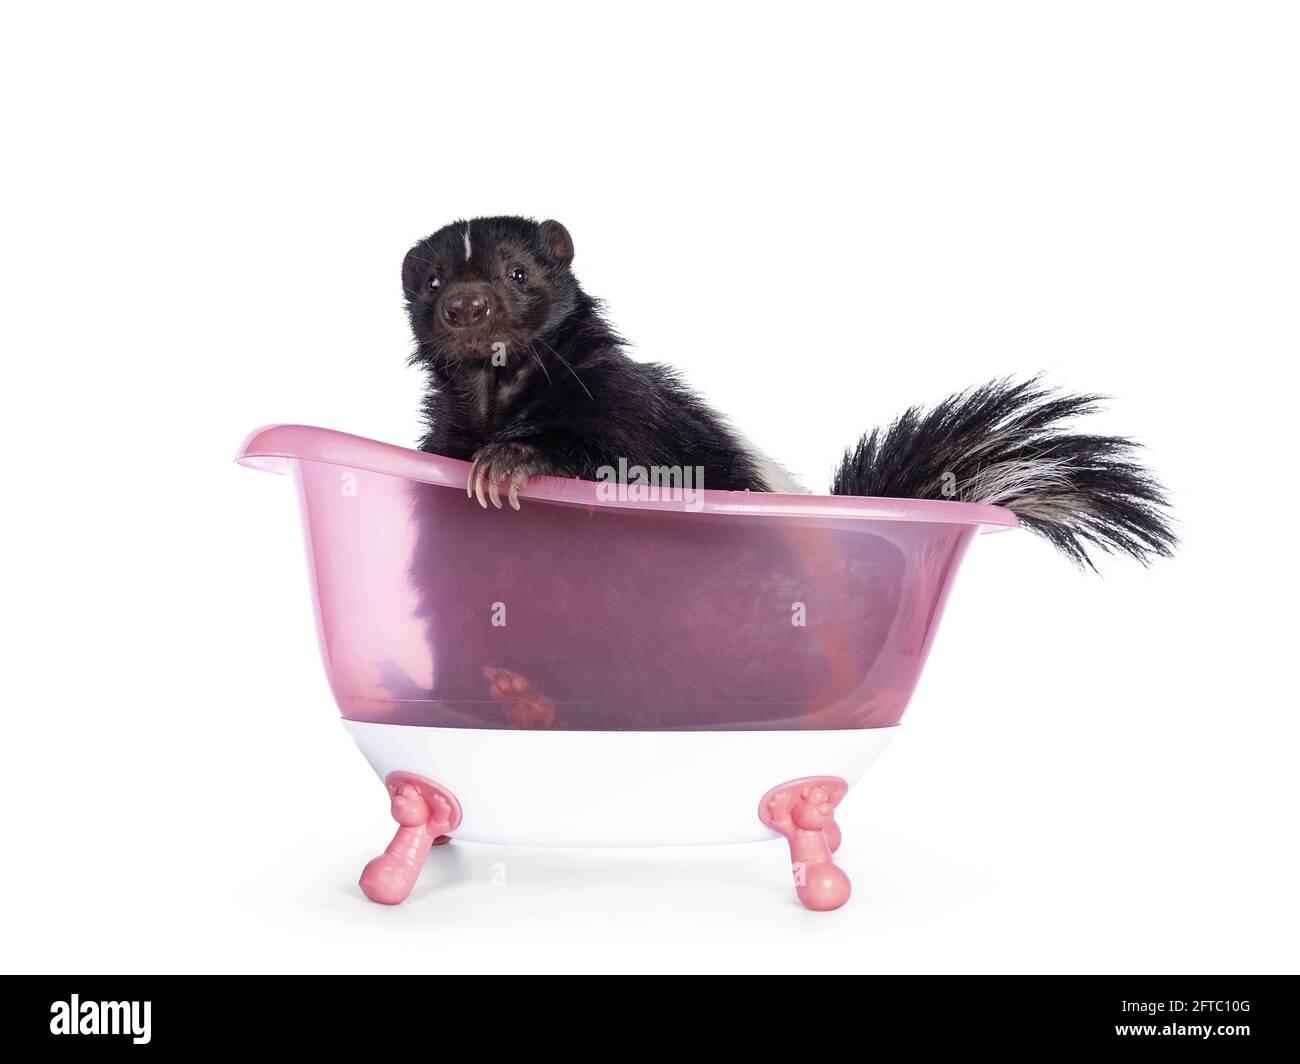 Cute classic black with white stripe young skunk aka Mephitis mephitis, sitting in pink toy bath tub. Looking straight at camera. Isolated on a white Stock Photo